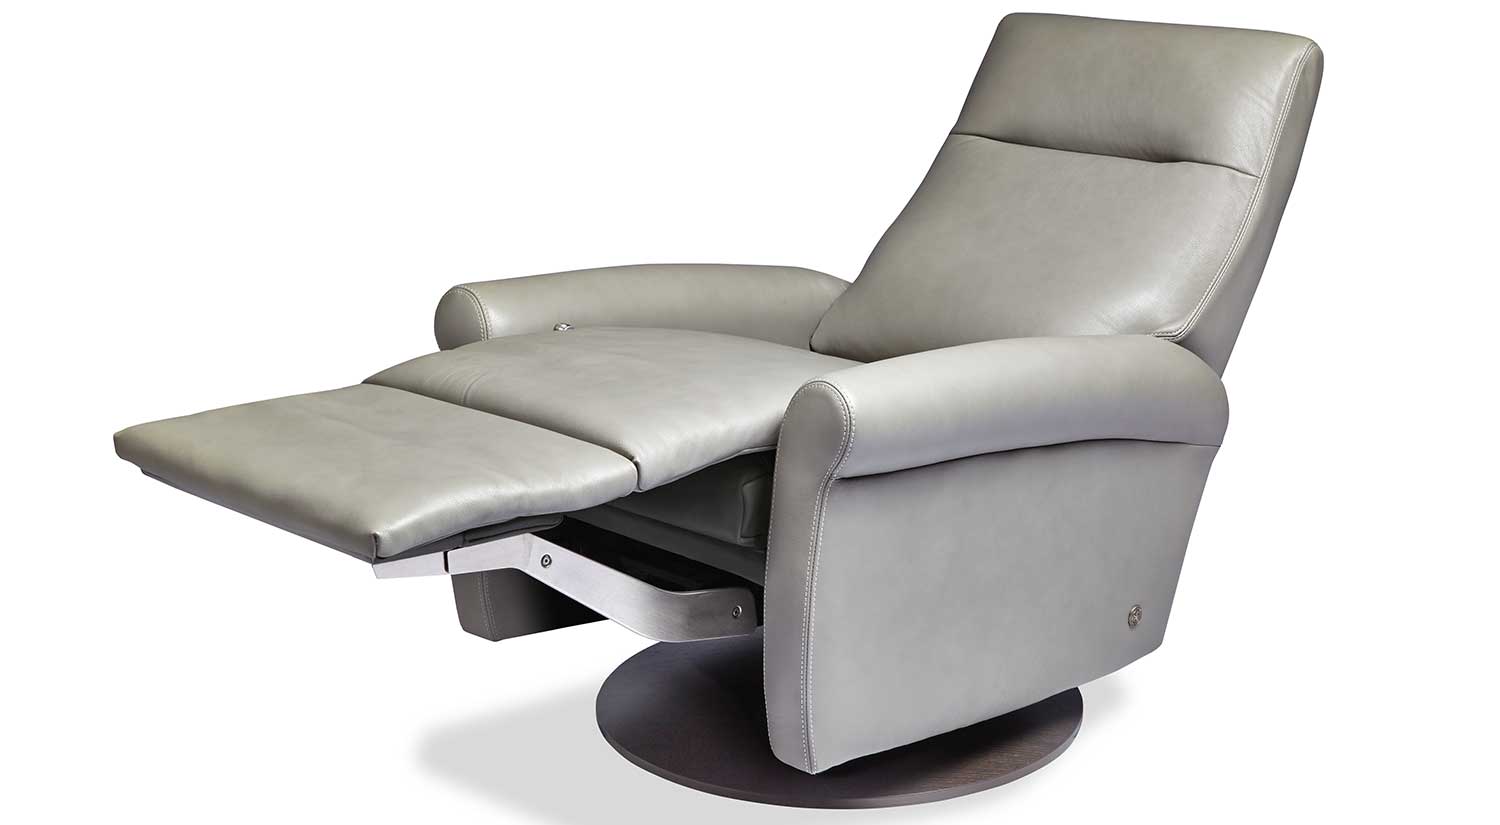 Circle Furniture The Best Recliners And Sofas For Back Pain In